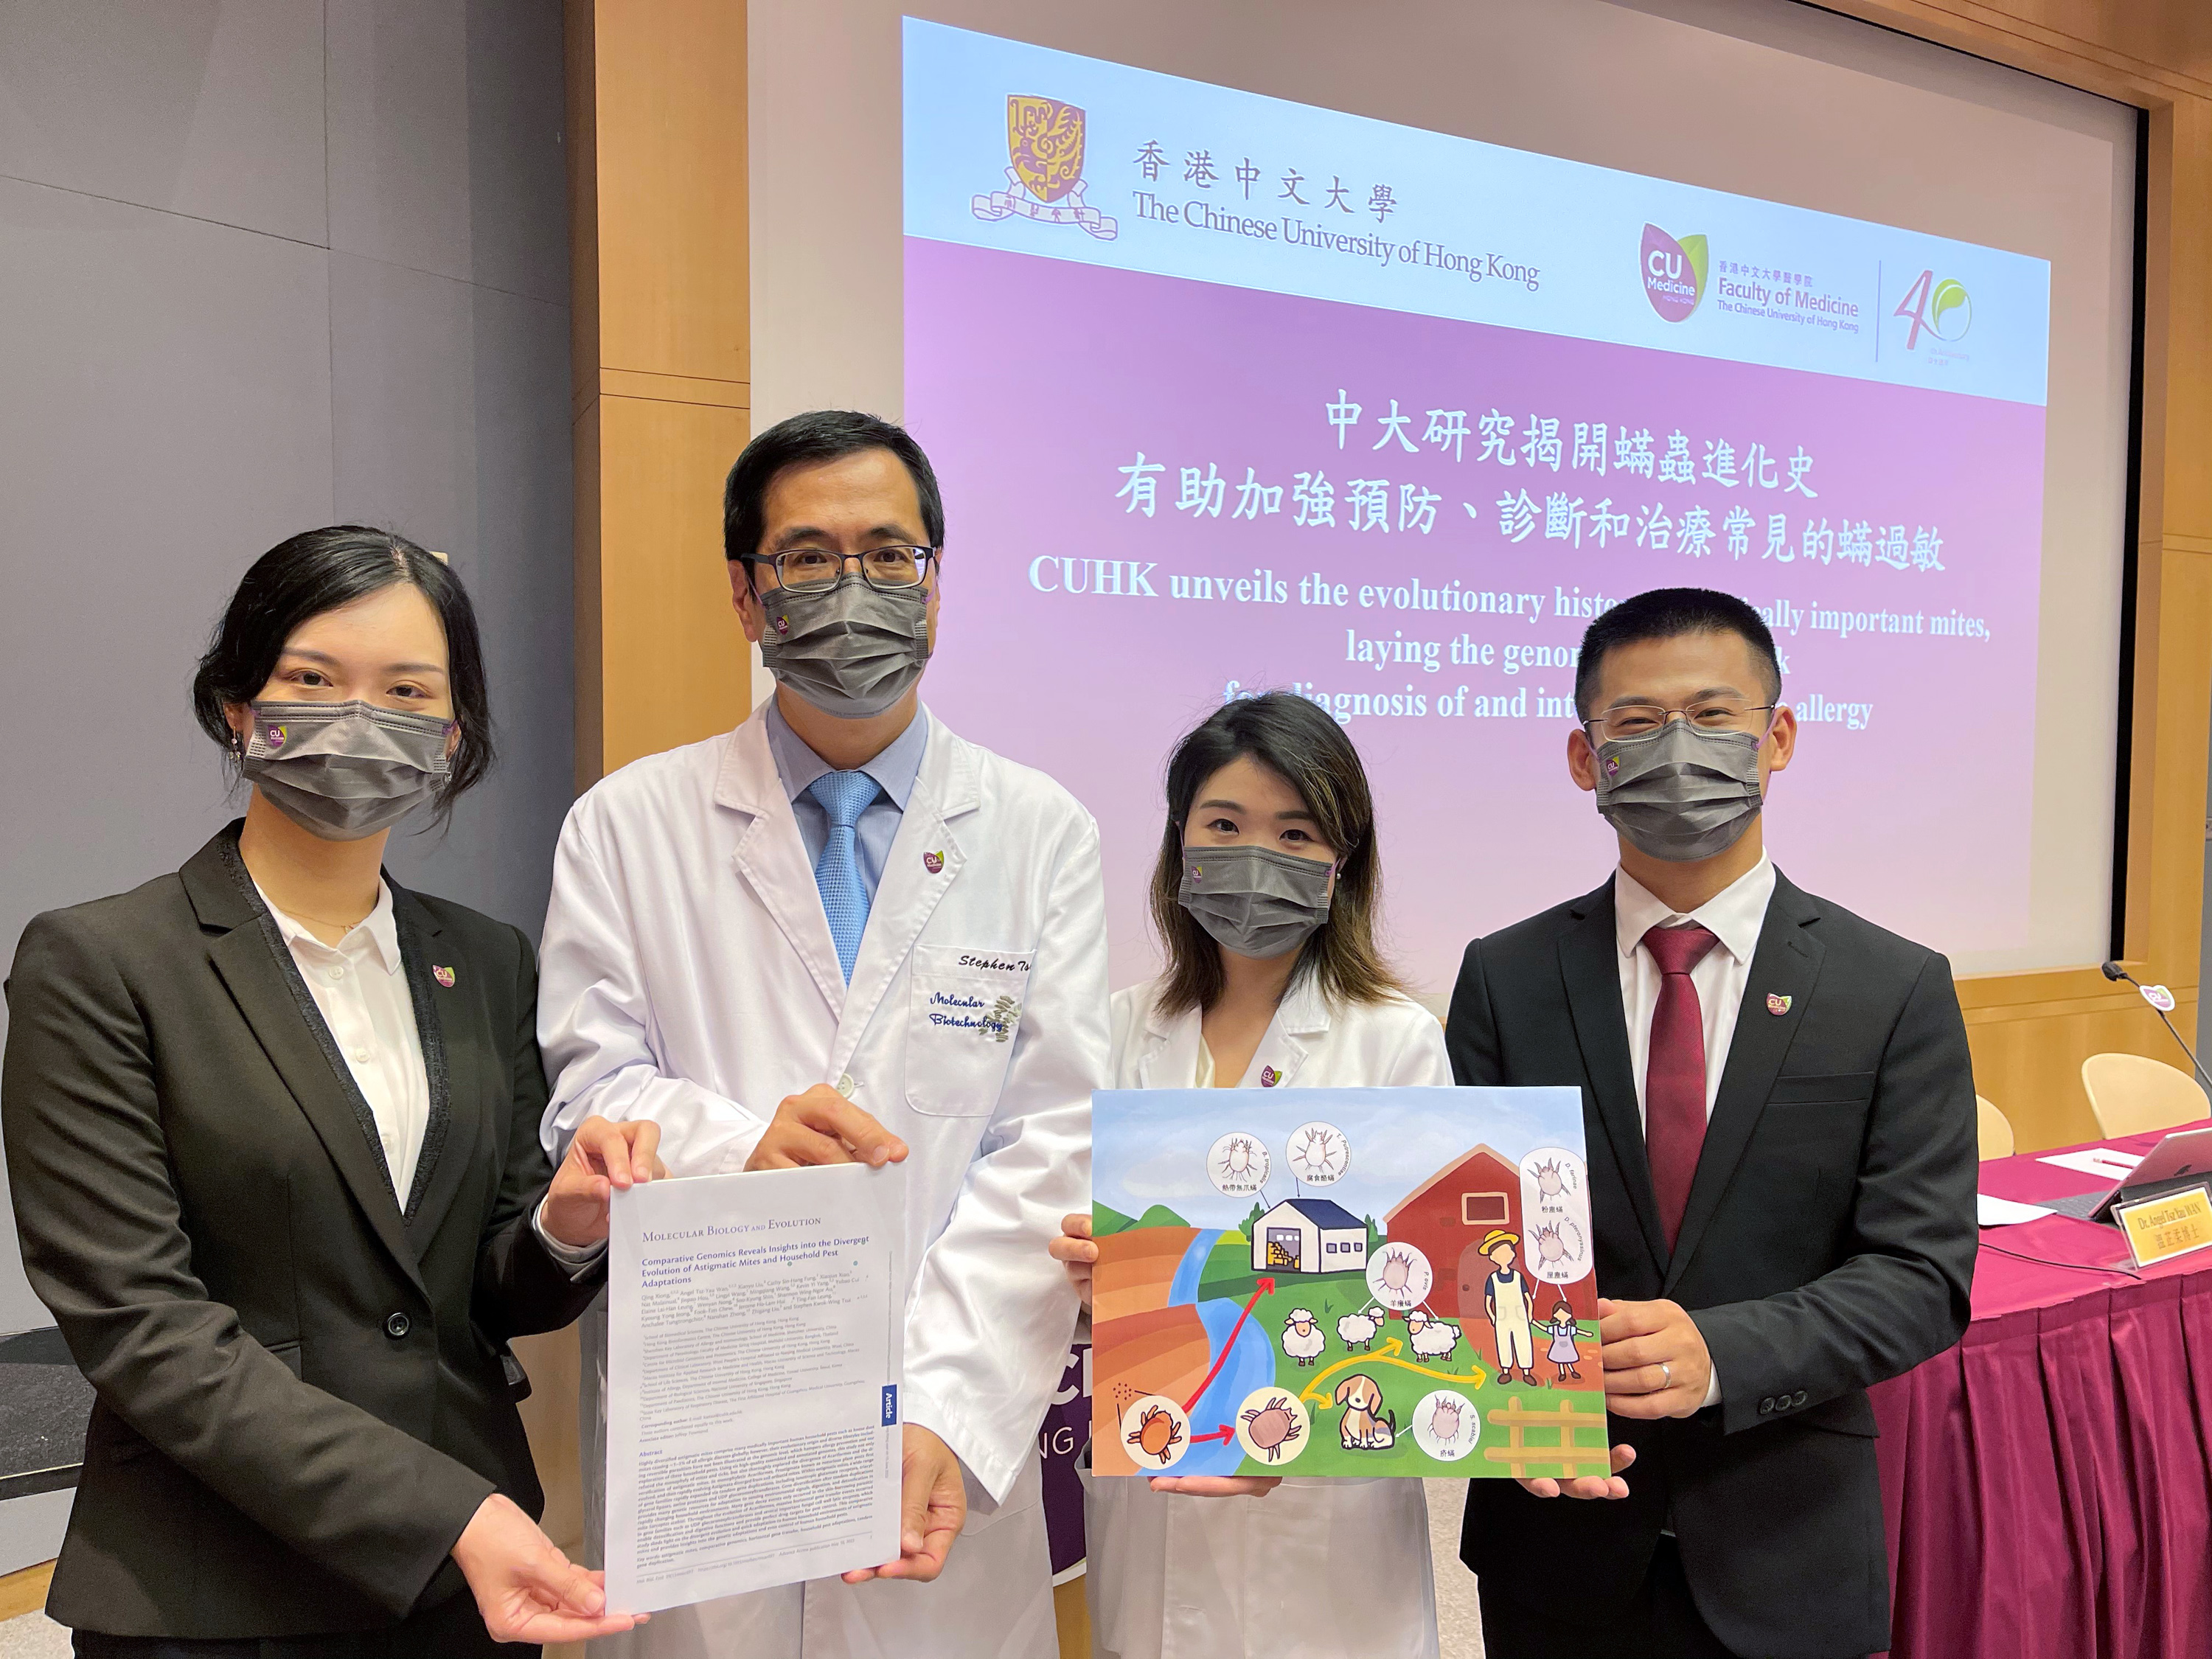 From left: Dr. Angel Wan, Prof Stephen Tsui, Dr. Agnes Leung, Dr. Qing Xiong